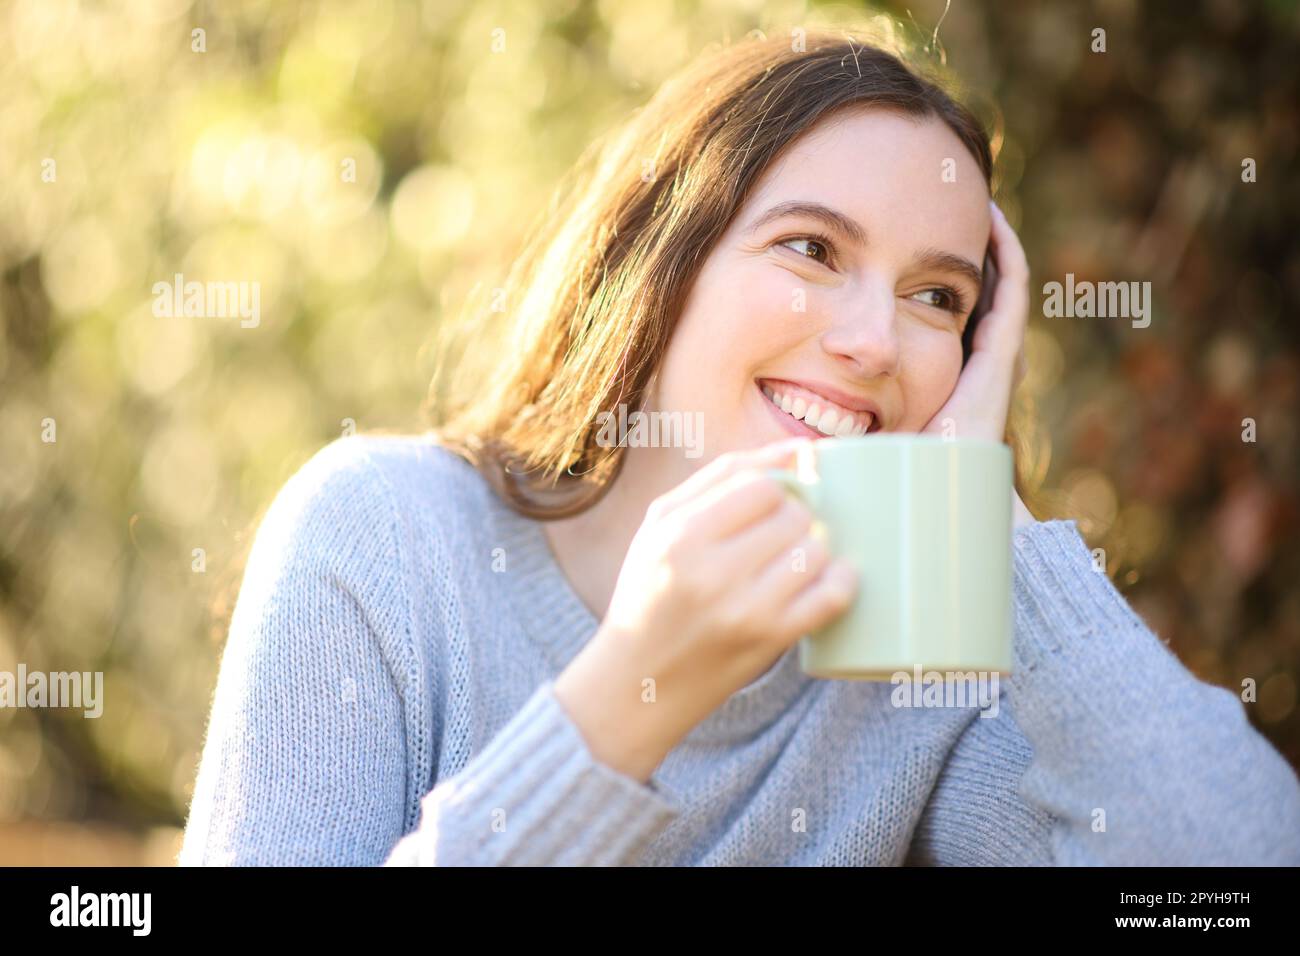 Happy woman drinking coffee in a park looking away Stock Photo